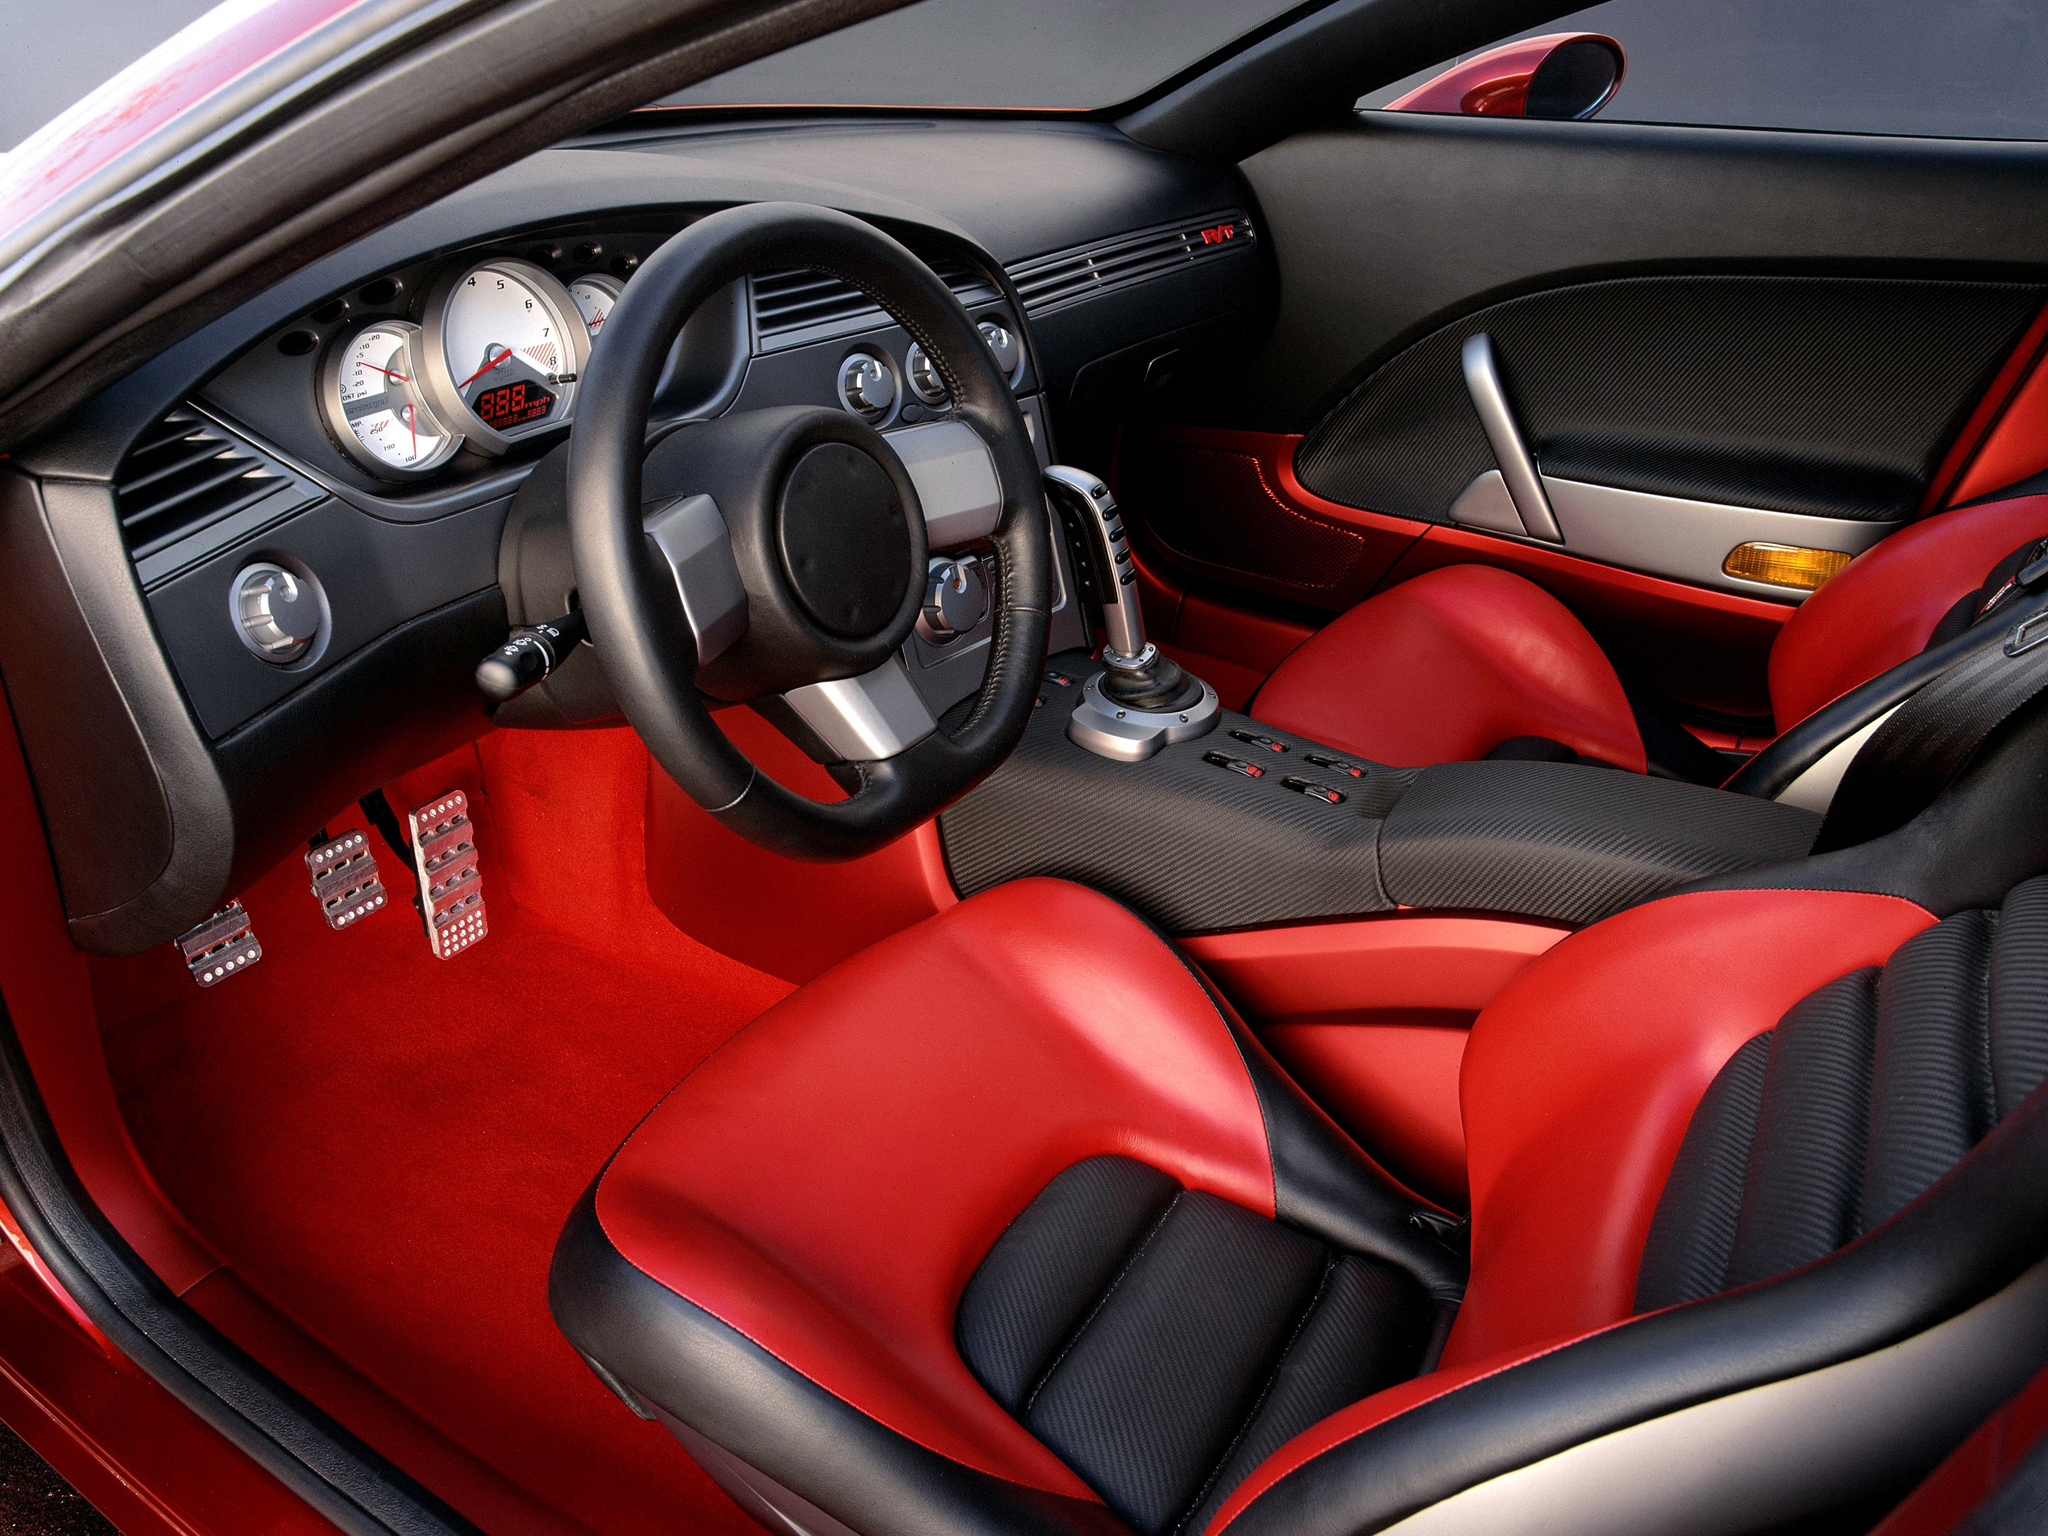 1999, Dodge, Charger, R t, Concept, Muscle, Supercar, Interior Wallpaper